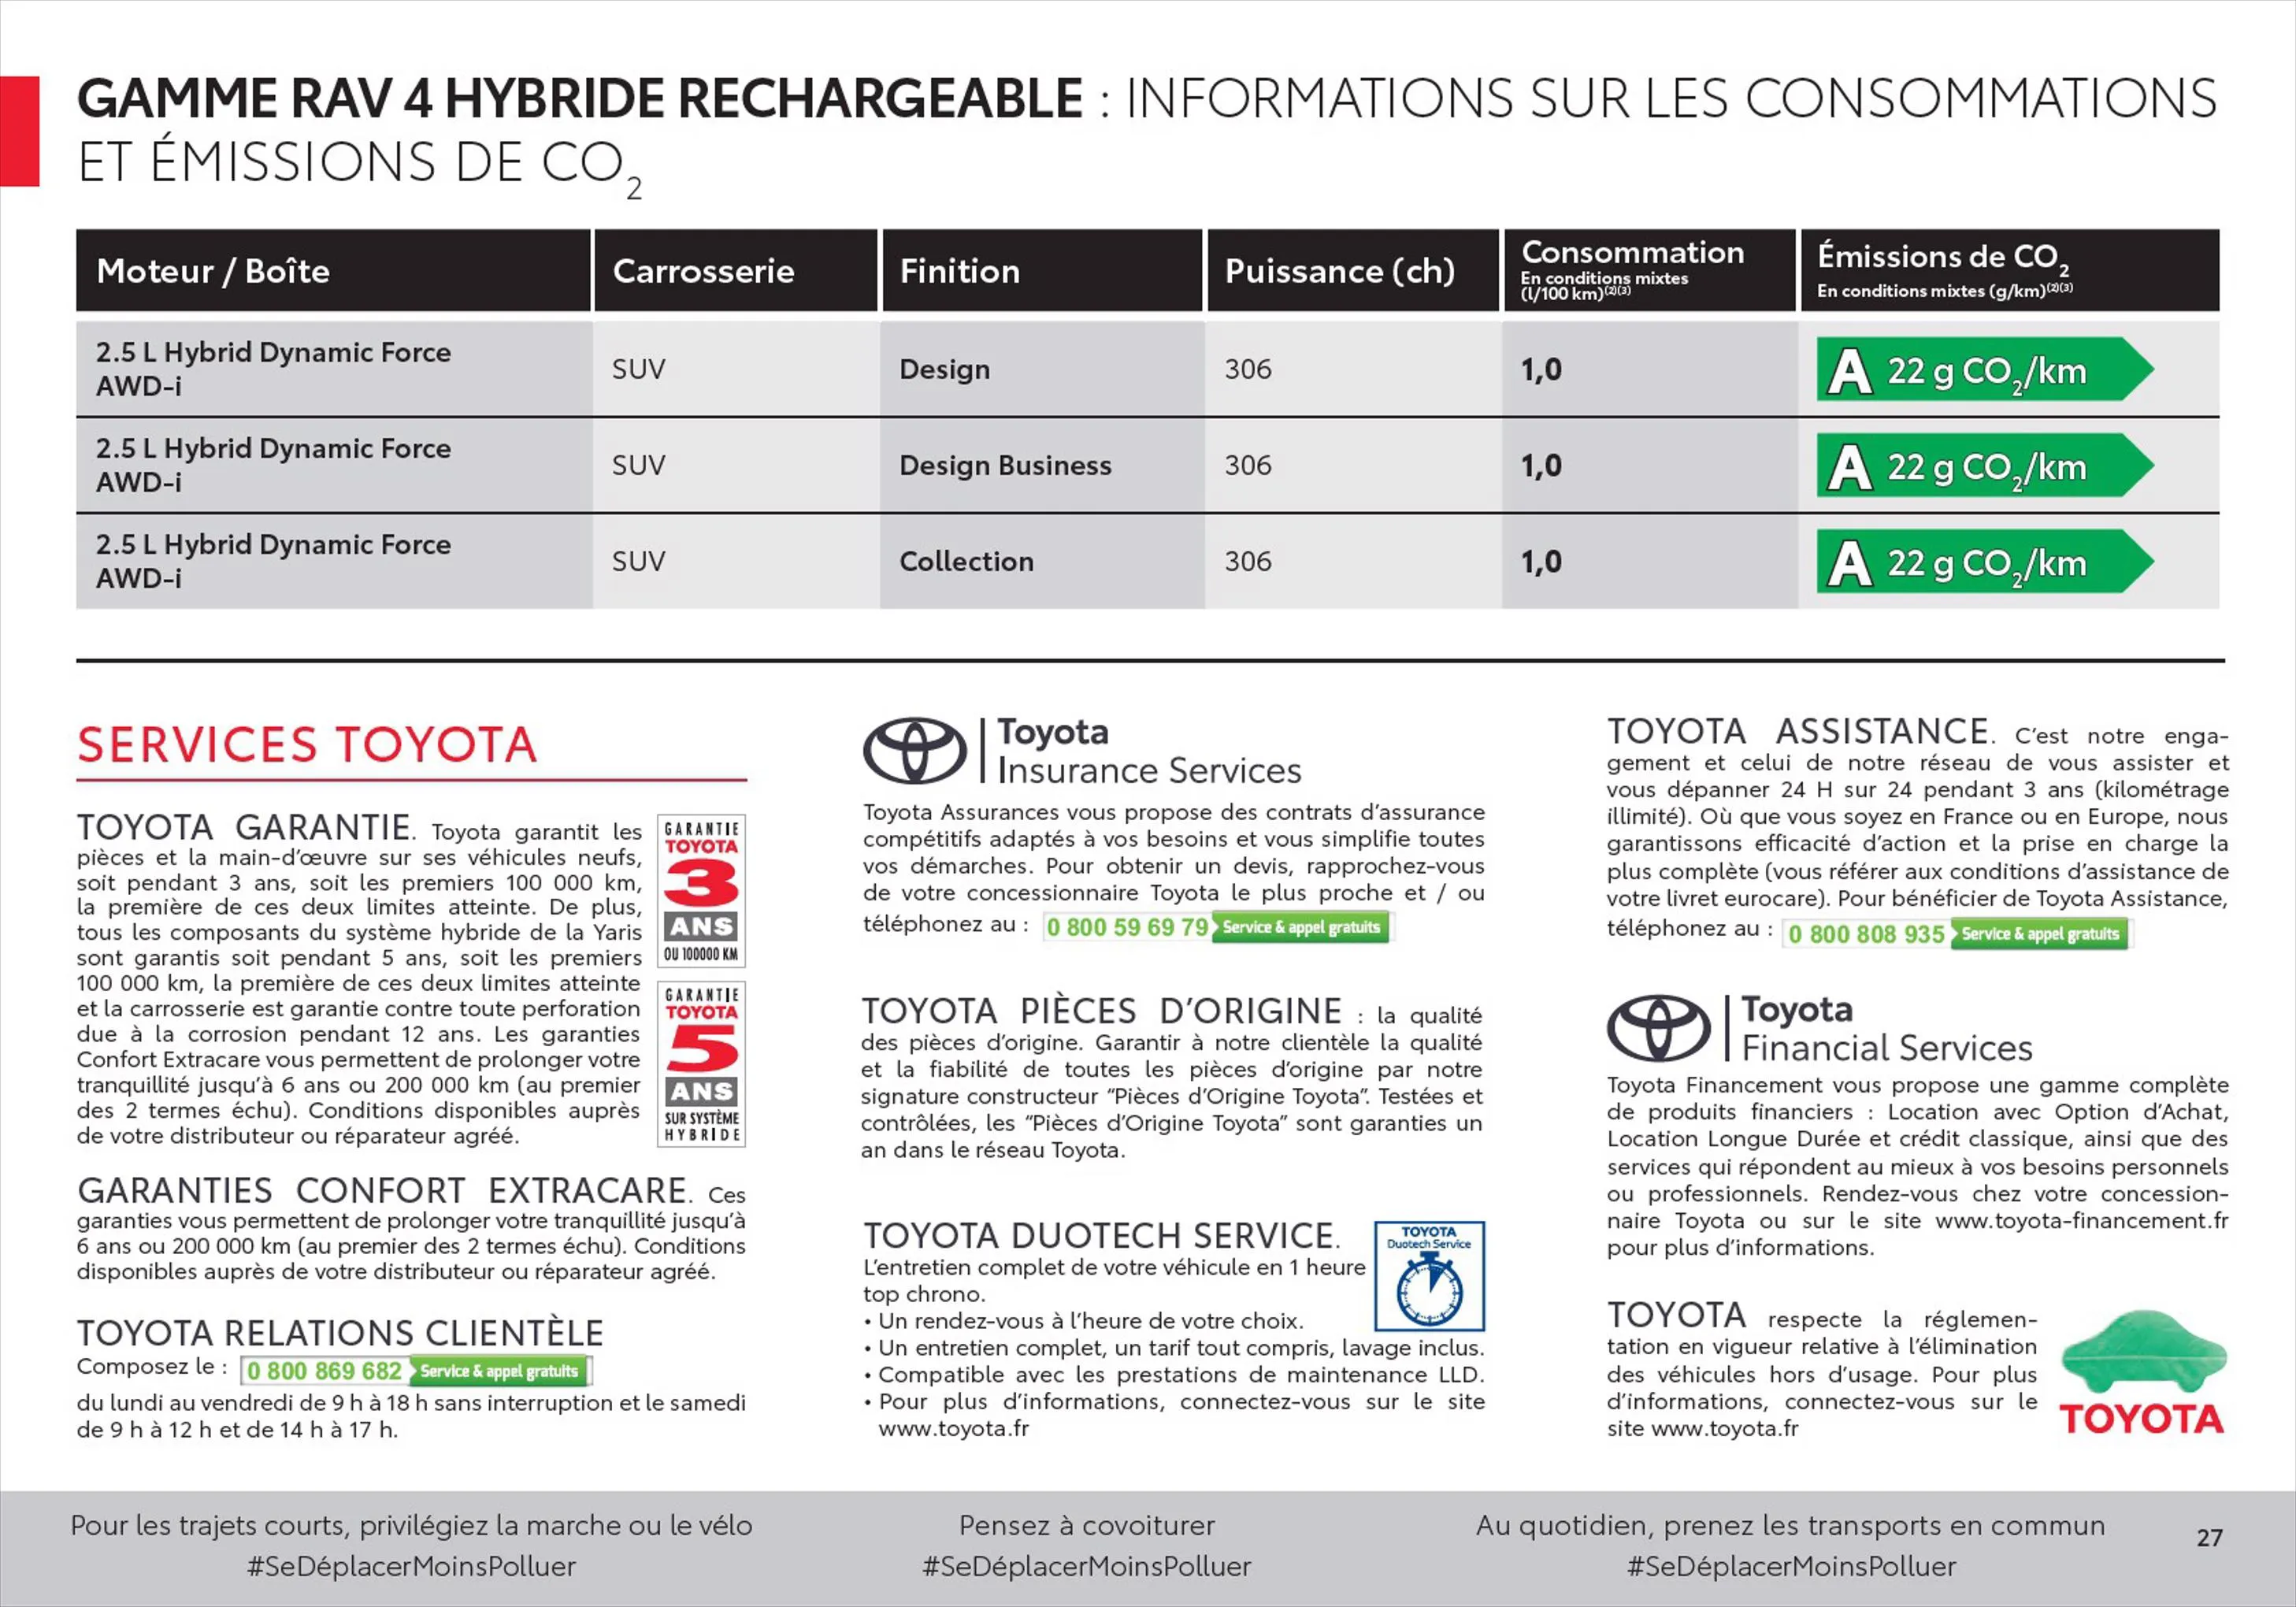 Catalogue Toyota RAV4 Hybride Rechargeable, page 00027